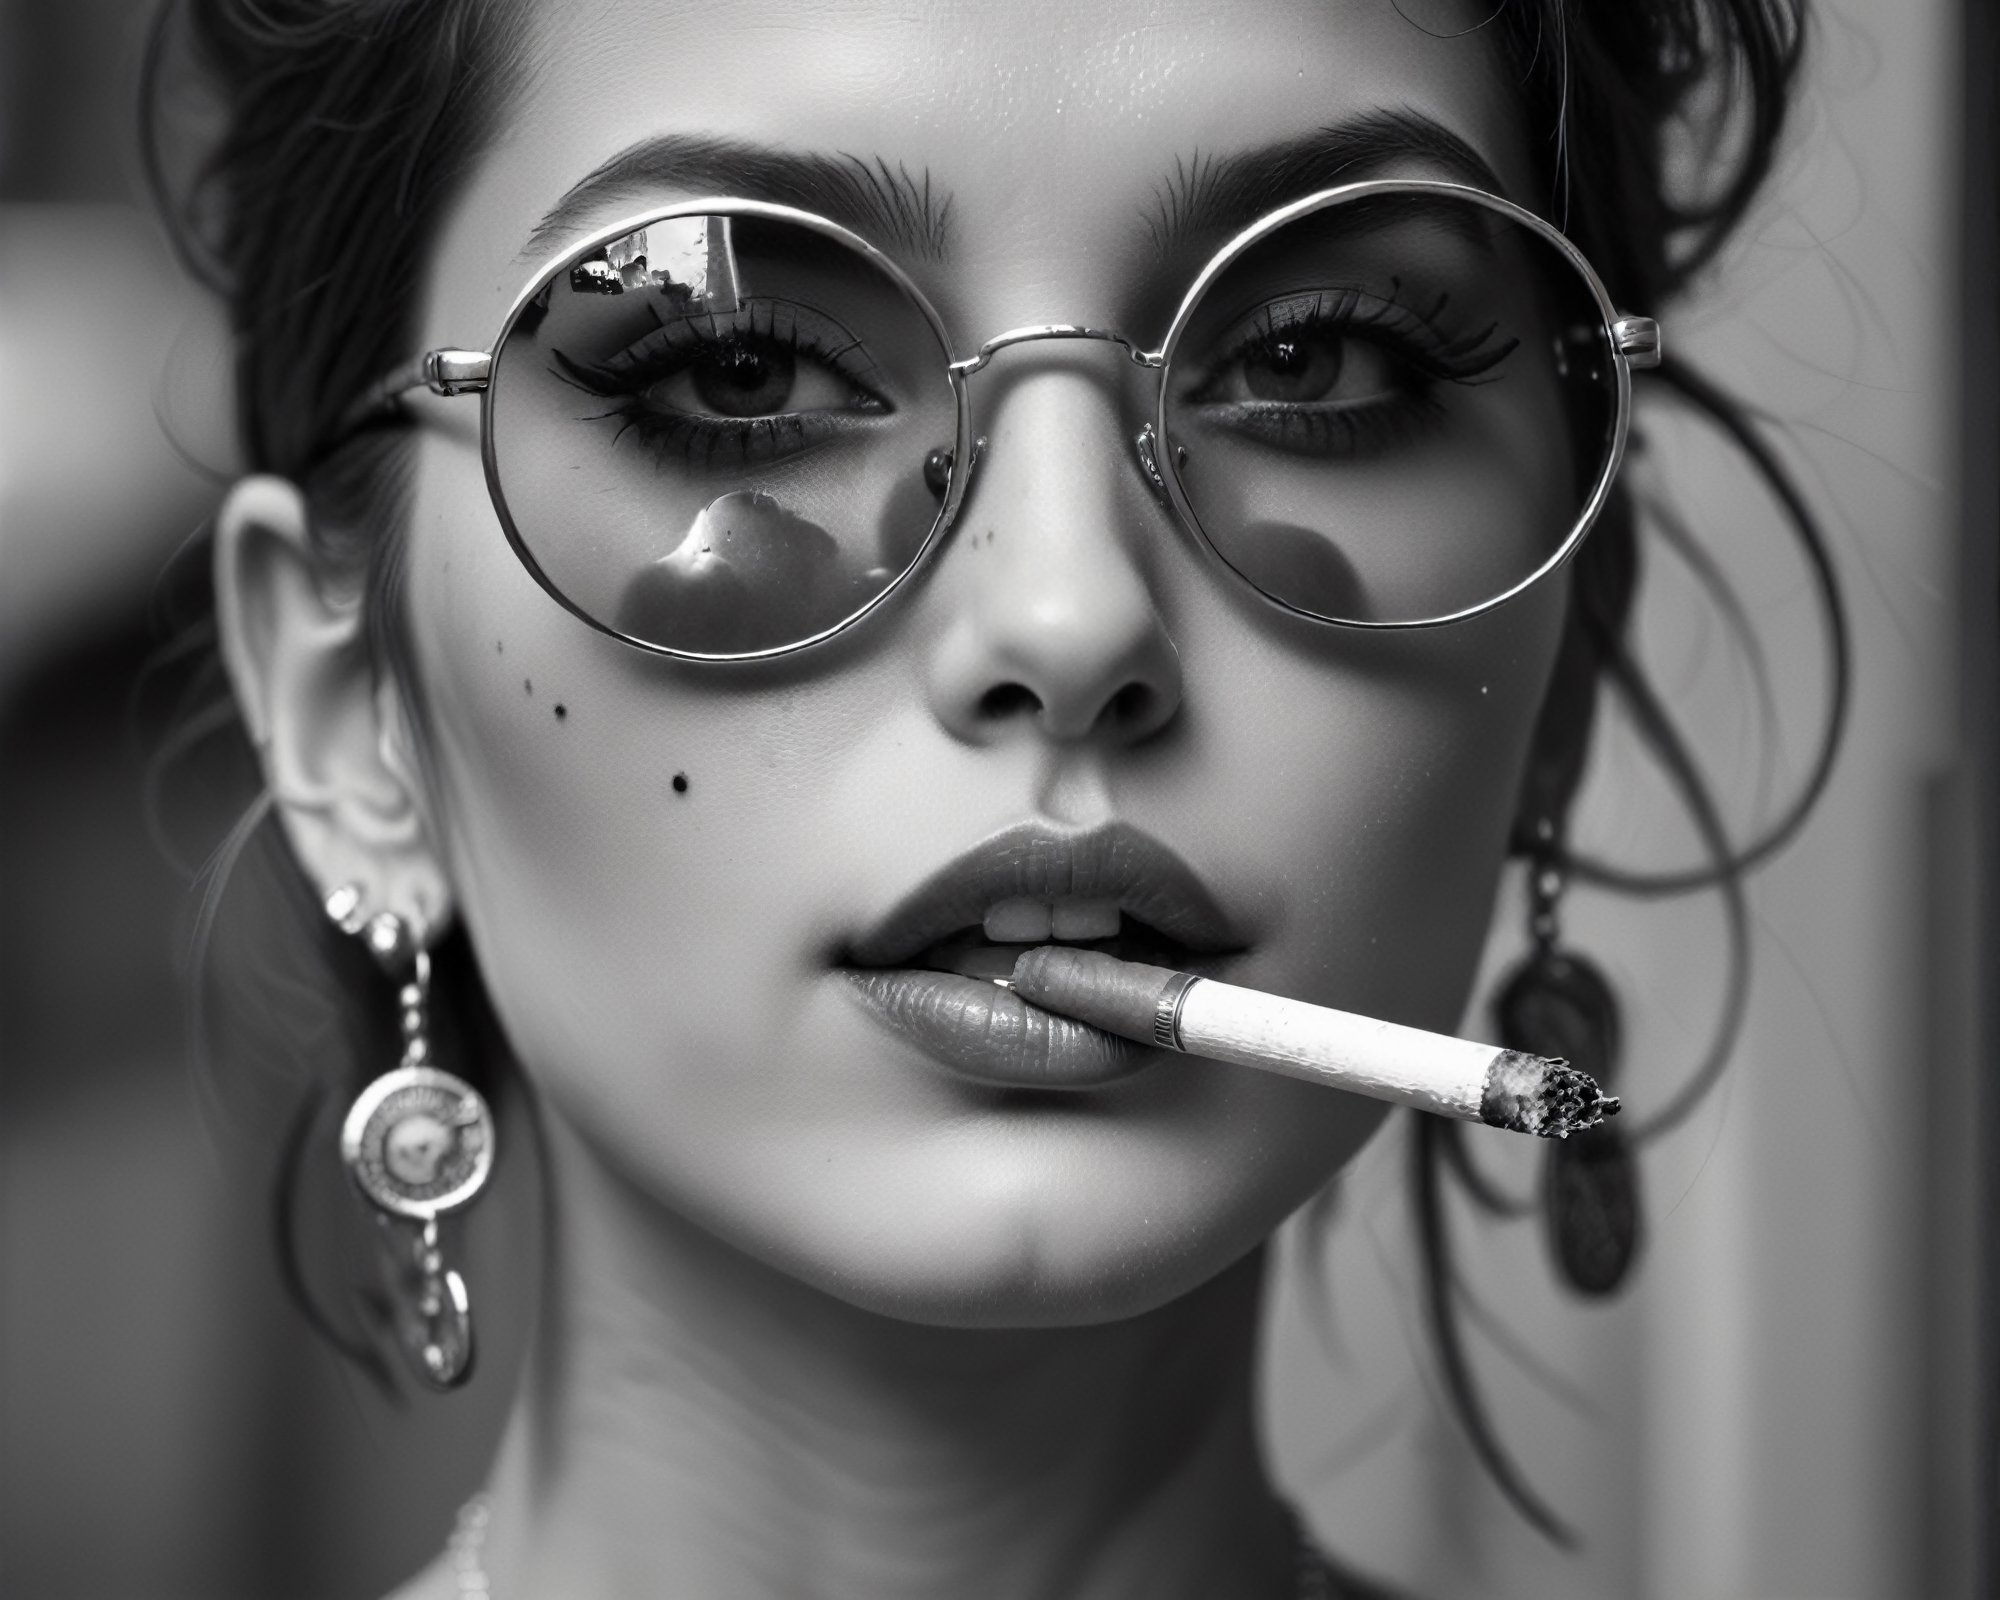 The most beautiful woman in the world with mirrored sunglasses on, has a mole on one of her cheeks, has a small tattoo on her neck, wearing two silver earrings in the shape of a vintage style camera, with a lit cigarette in her mouth, black and white photograph, close-up detail